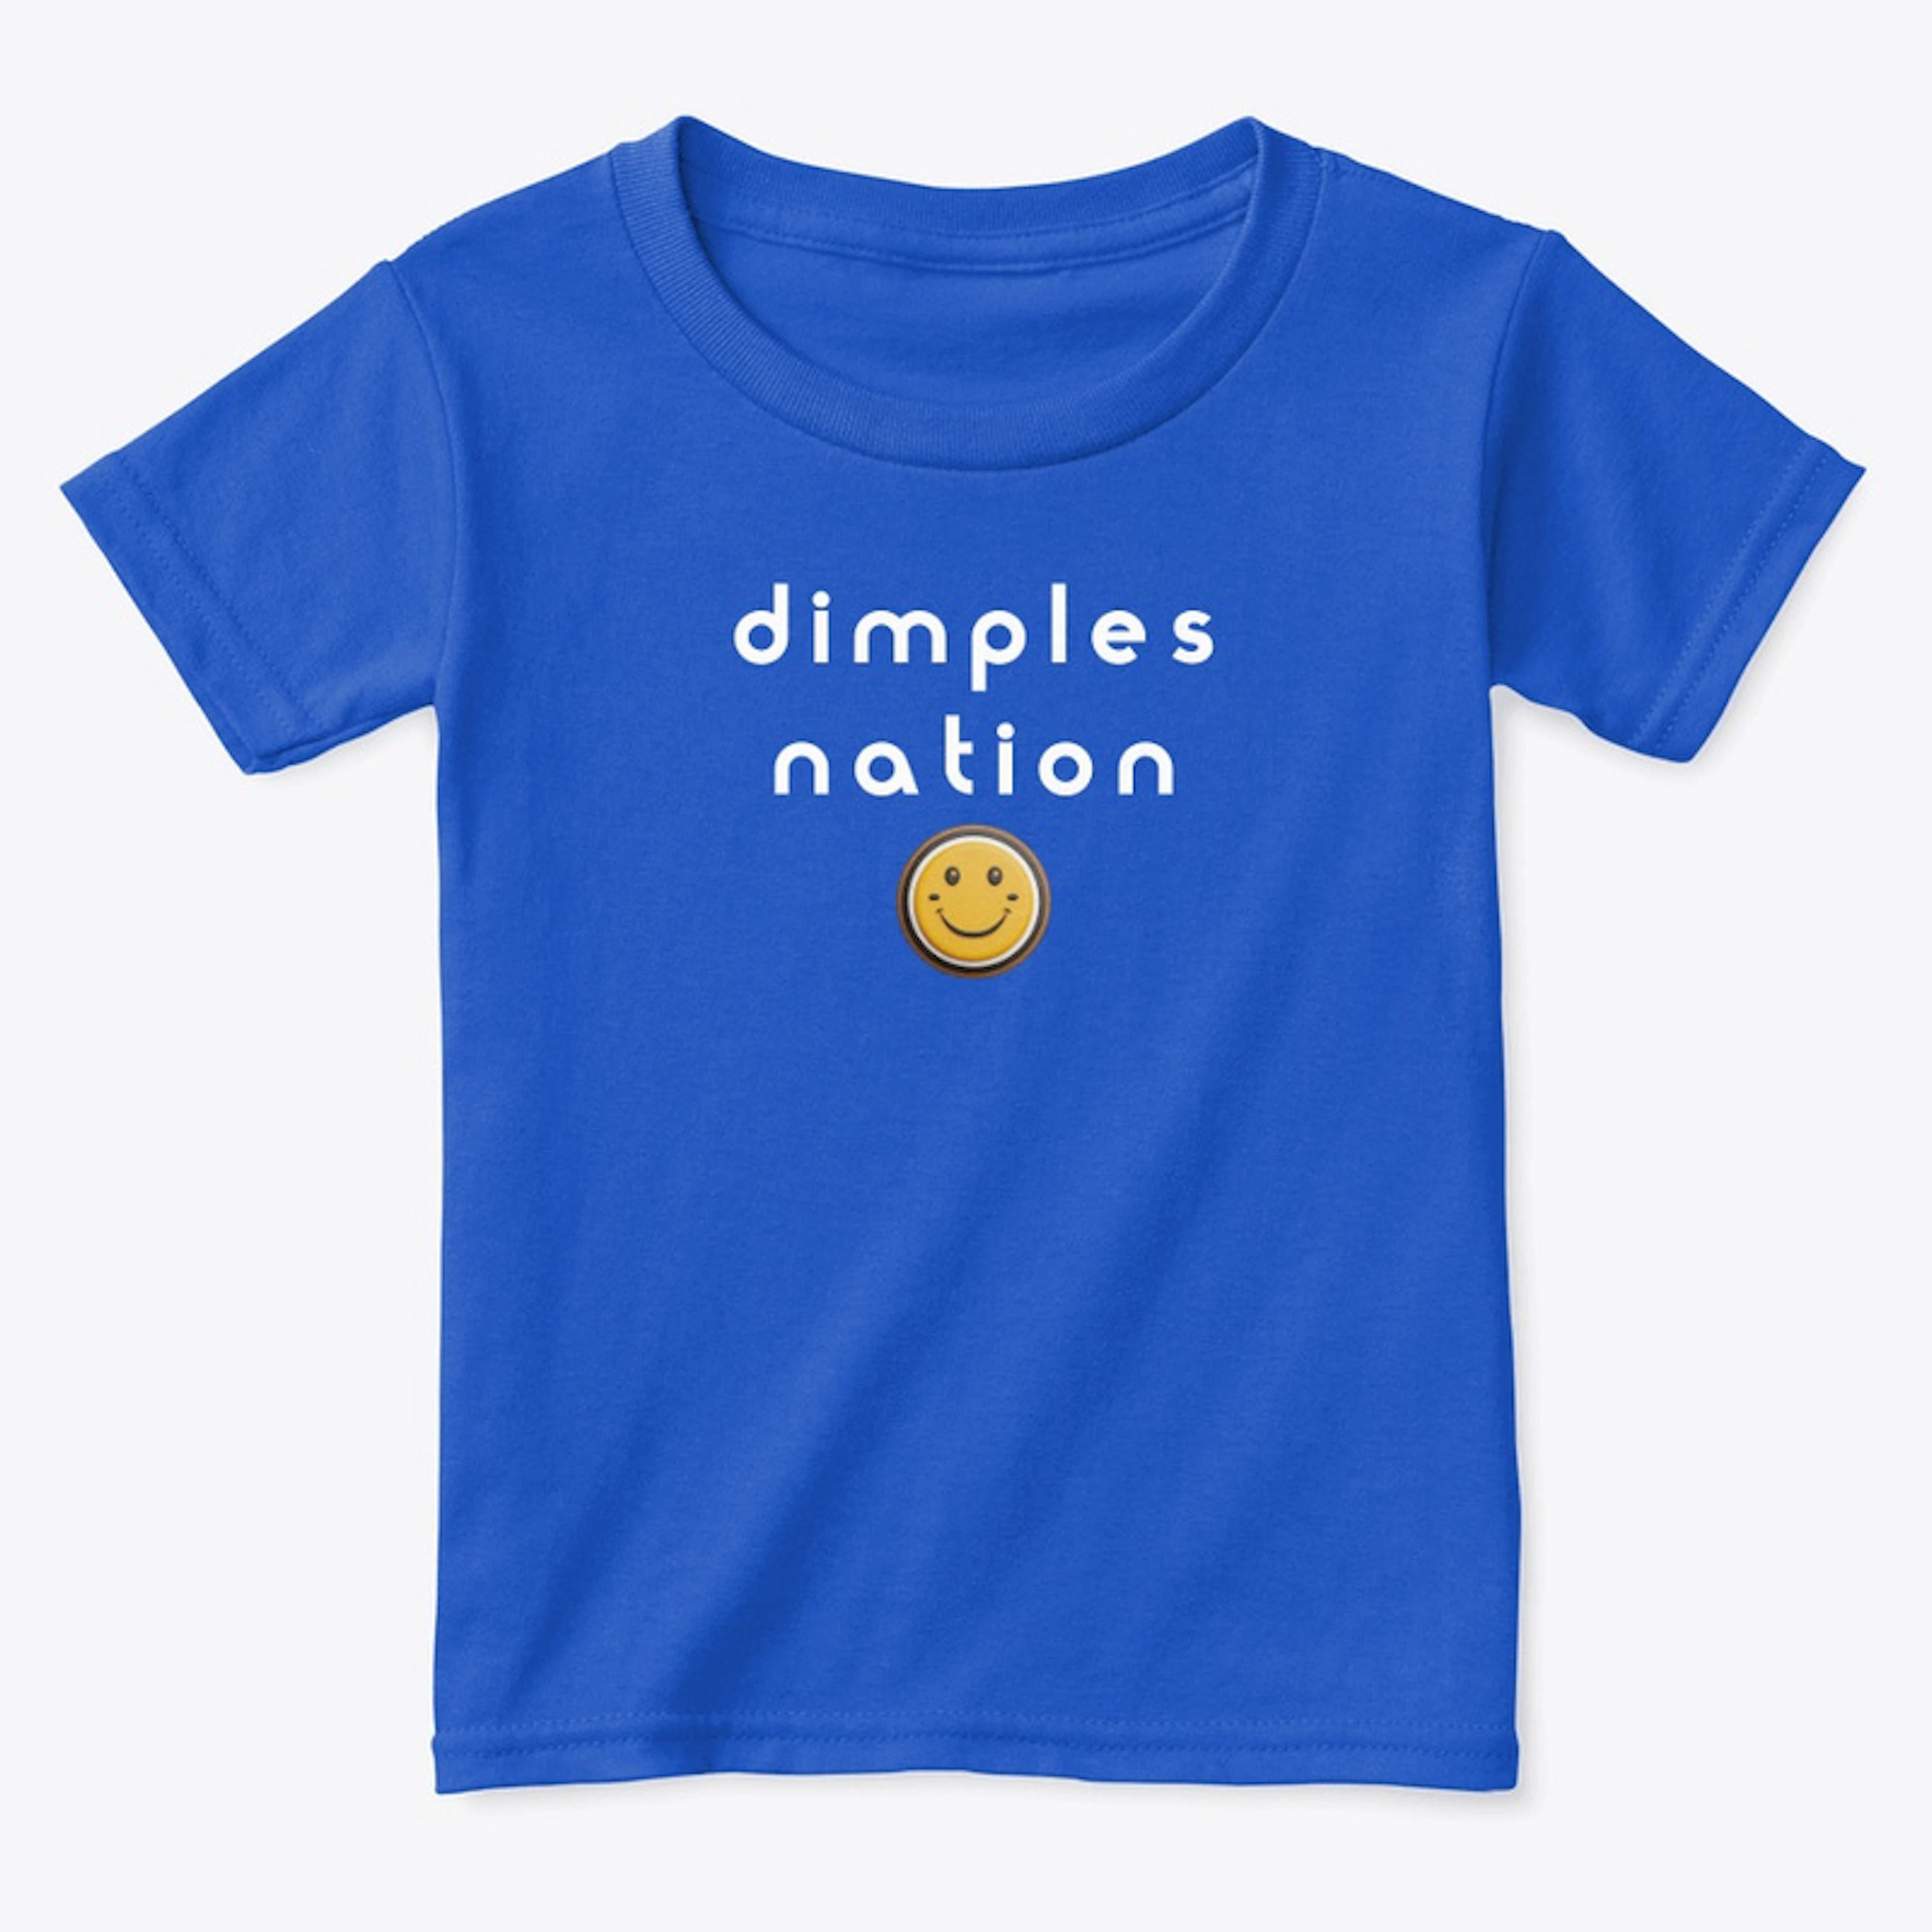 Dimples Nation